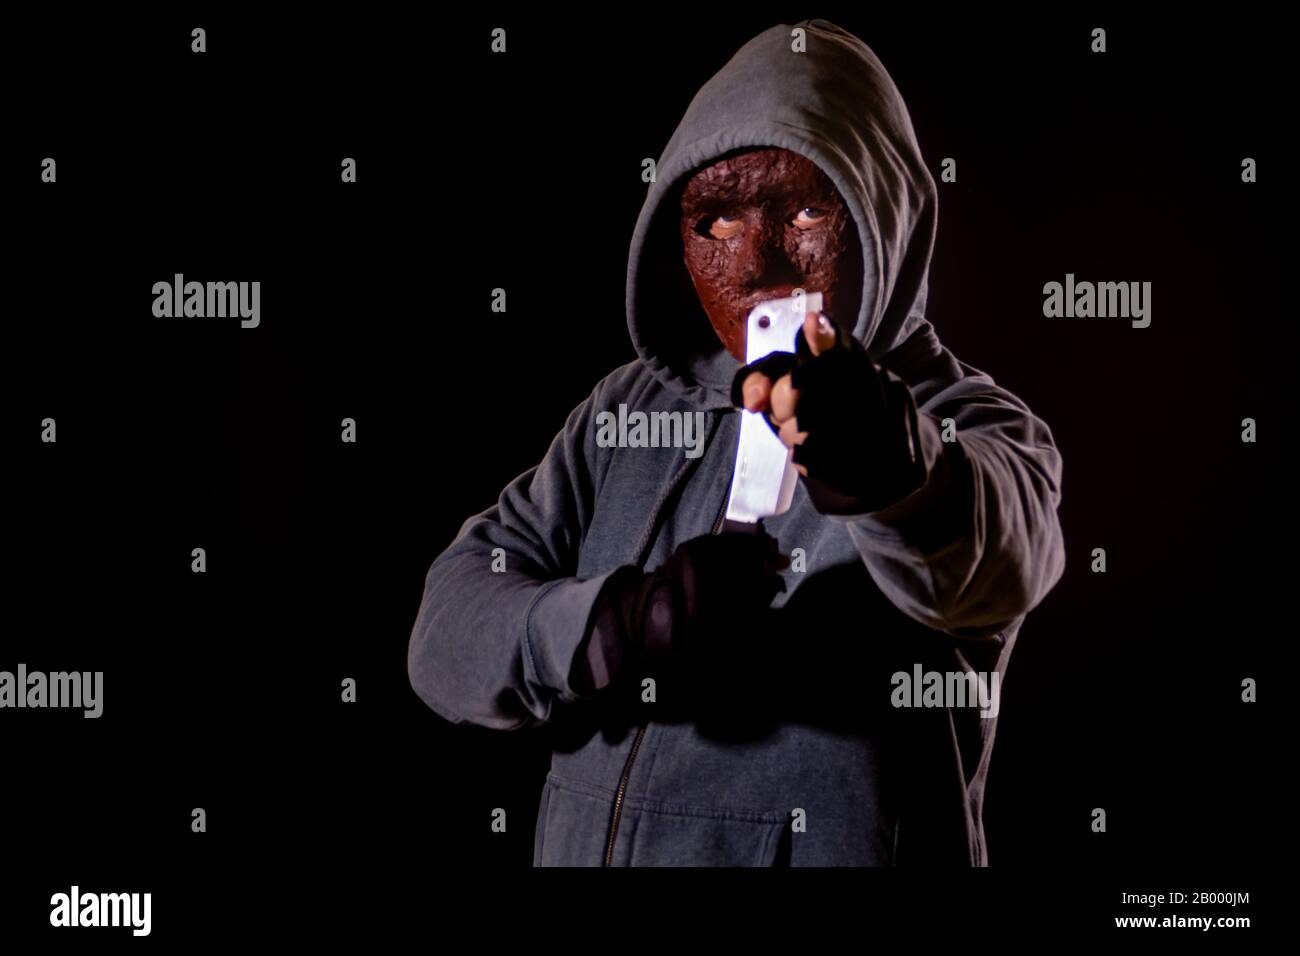 Scary killer in mask and hoodie holding knife and pointing finger Stock Photo